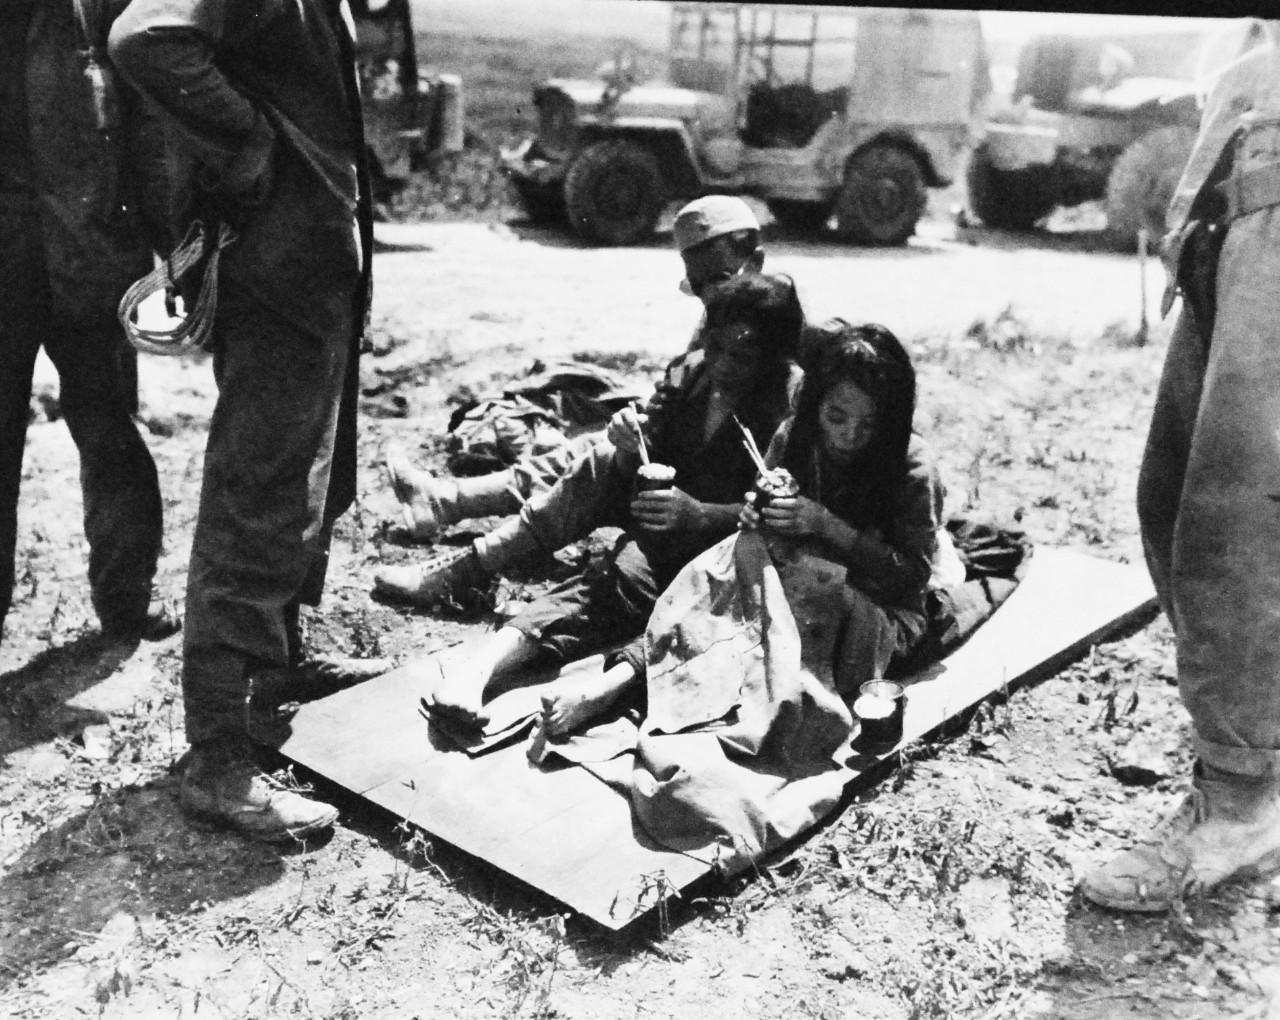 127-GW-666-128250:  Okinawa Campaign, April-June 1945.  Marines watching native Okinawan women eat rations after being held by the Japanese as prisoners.  Photographed by John Smith, June 1945.  Official U.S. Marine Photograph, now in the collection of the National Archives.  (2014/7/23). 